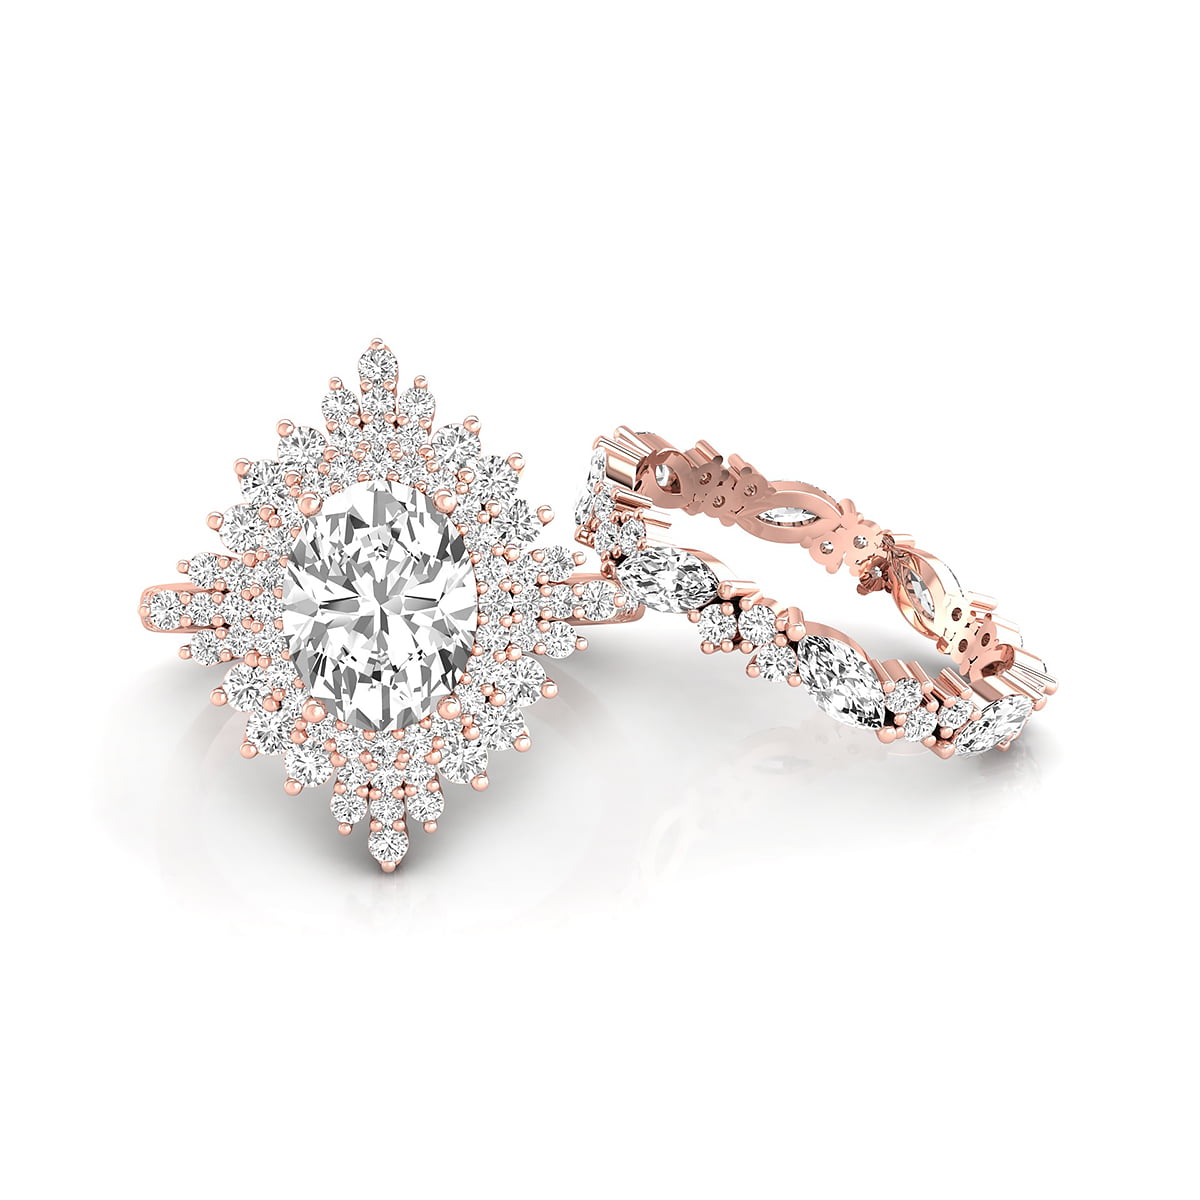 Oval-Marquise And Round Cut CZ Stone Starburst Halo Bridal Ring Set For Wedding